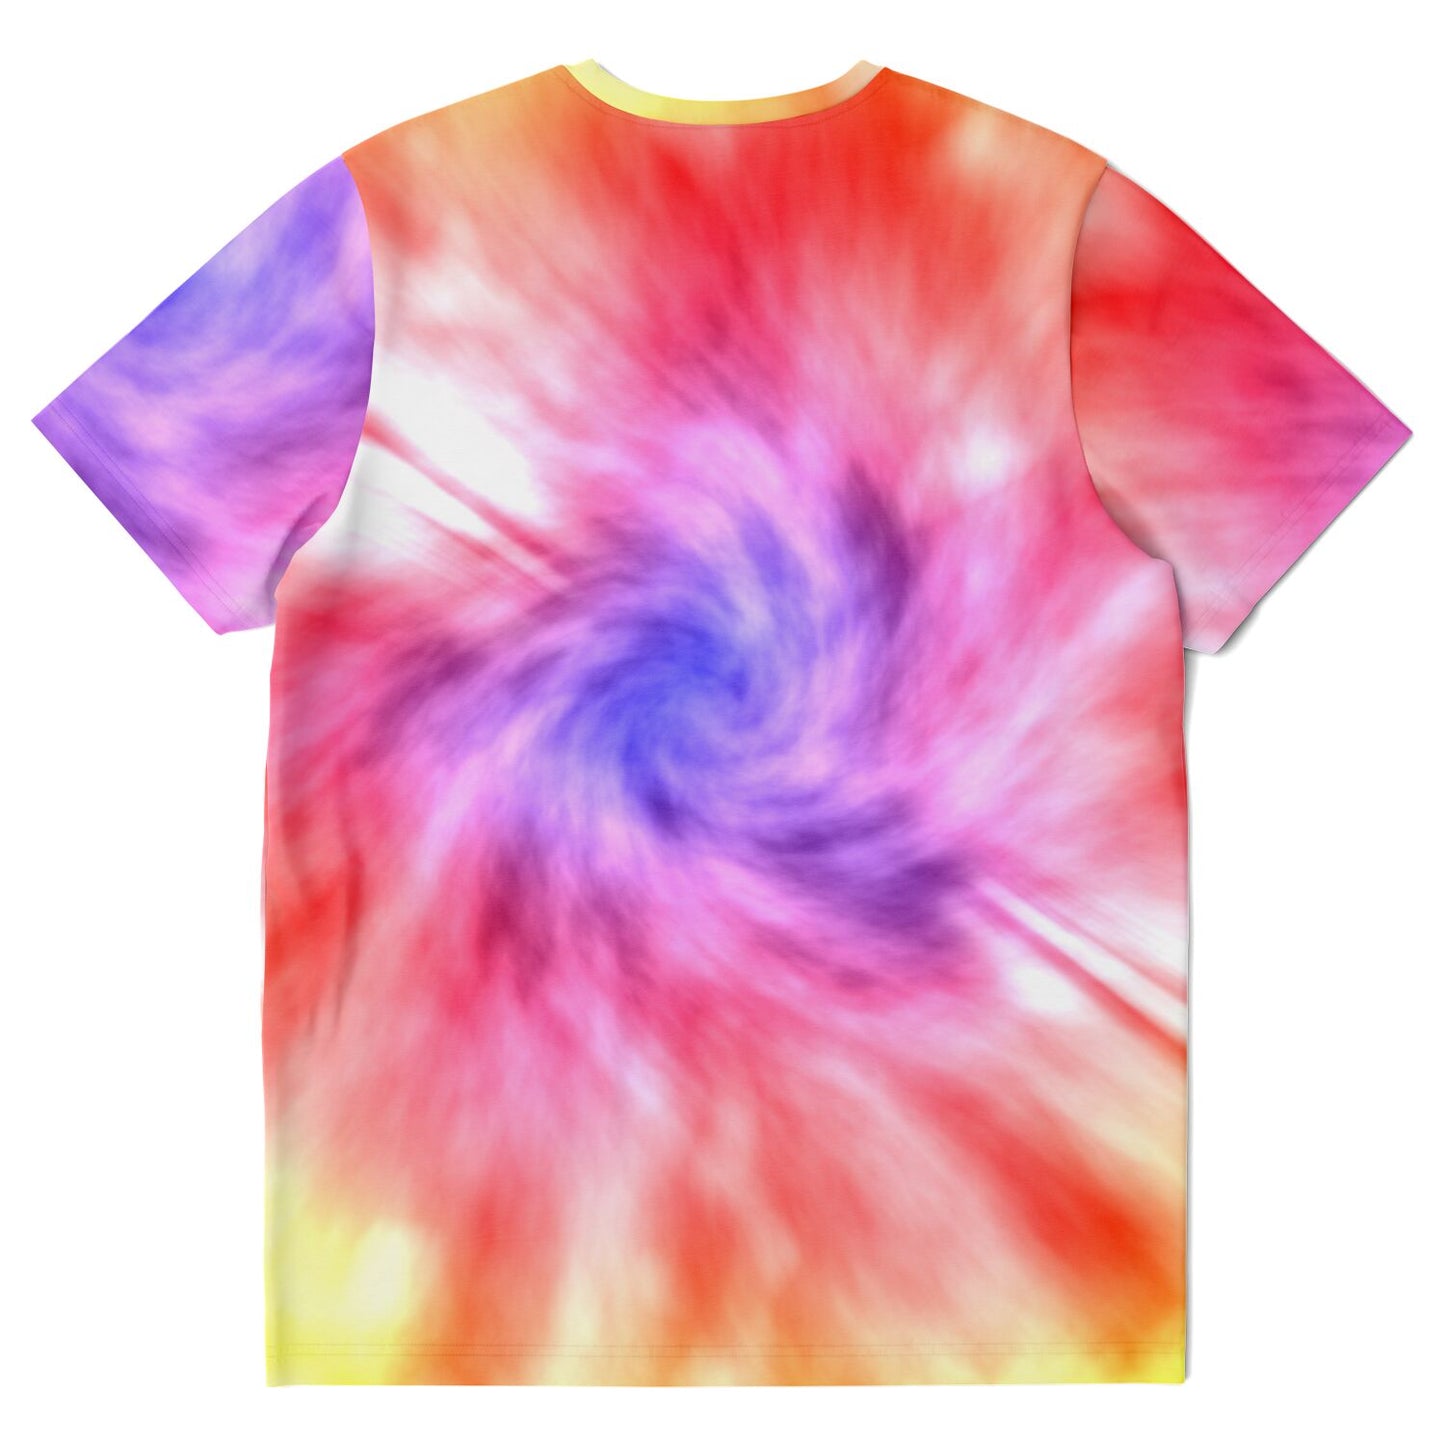 Tie Dyes - Yellow and Oranges (Red River Gorge)